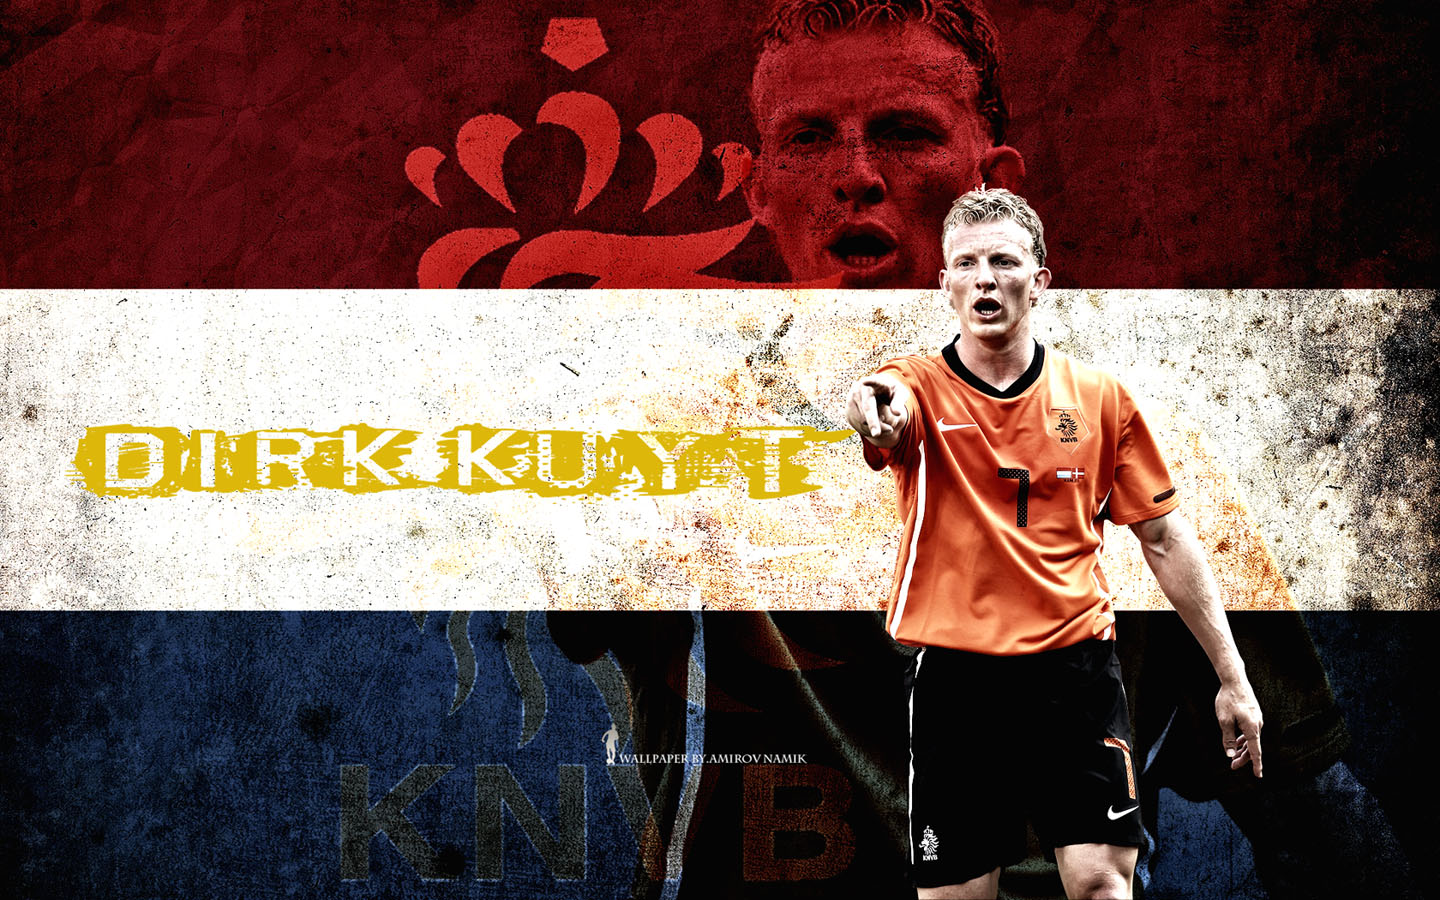 Dirk Kuyt Picture by Namik Amirov